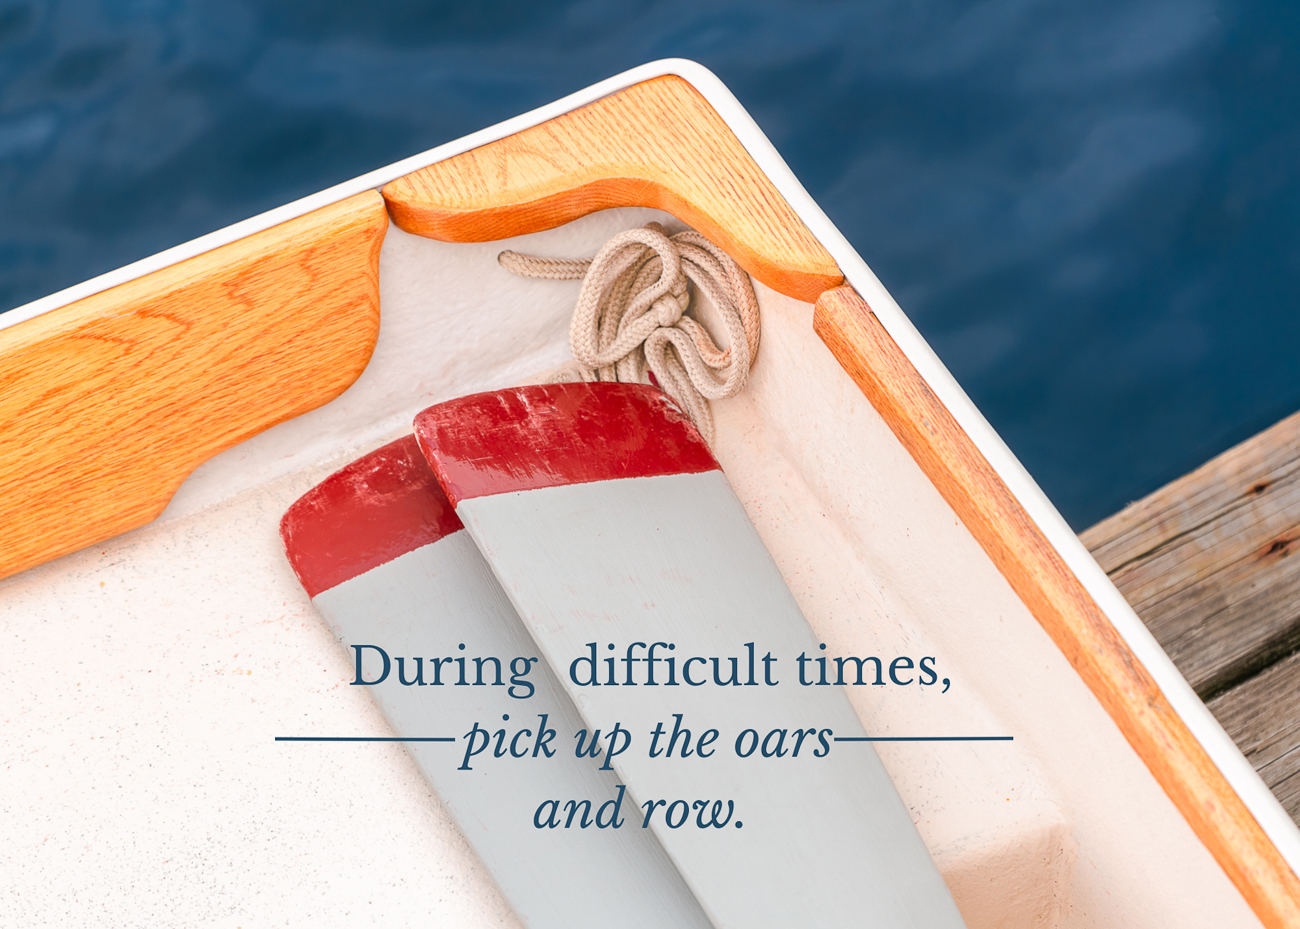 A photo of two oars in a rowboat and a quote about difficult times.